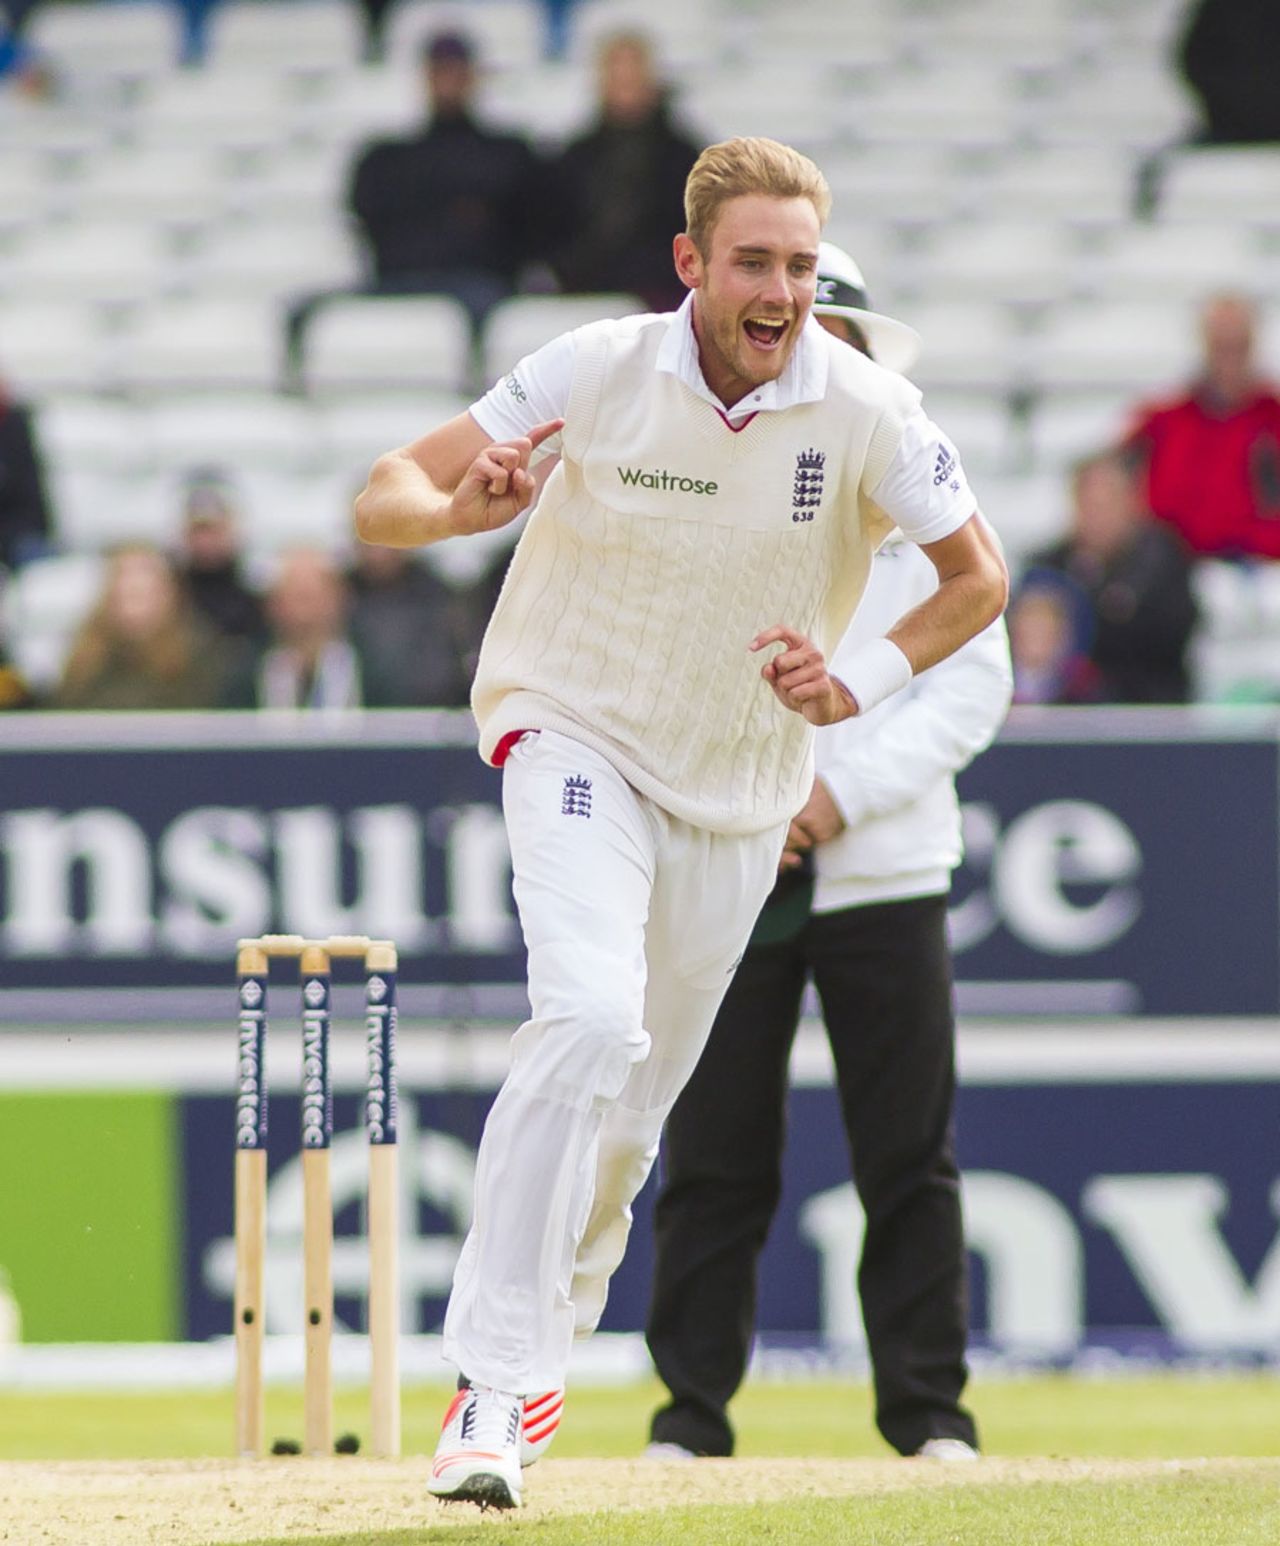 Stuart Broad followed up his batting with early wickets, England v New Zealand, 2nd Investec Test, Headingley, 3rd day, May 31, 2015